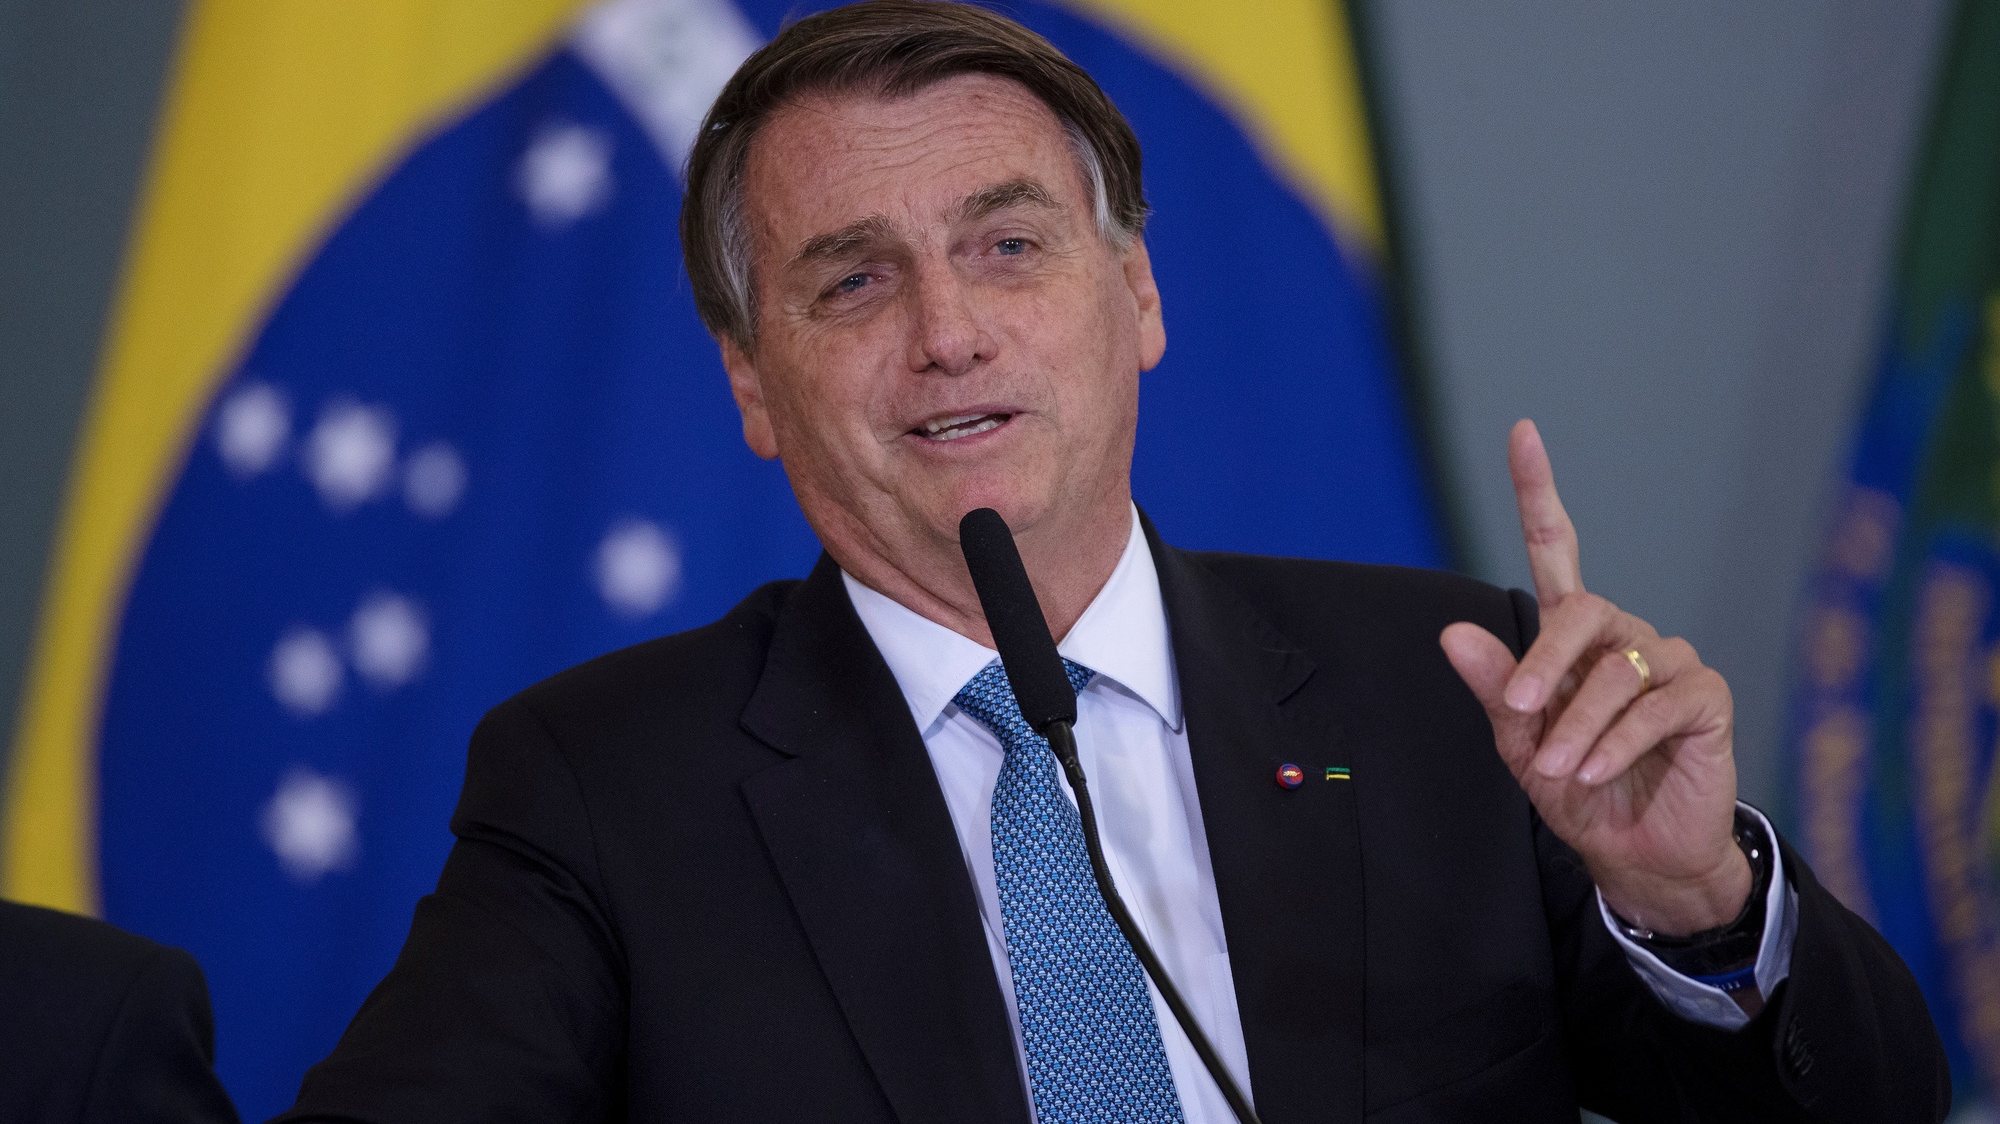 epa09512183 Brazilian President Jair Bolsonaro participates in a ceremony of Modernization of the Standards of Safety and Health at Work at the Palacio do Planalto in Brasilia, Brazil, 07 October 2021. The Senate commission investigating the Brazilian government&#039;s management of covid-19 extended its interrogations on 07 October due to new suspicions that President Jair Bolsonaro is still pressing for ineffective remedies.  EPA/JOEDSON ALVES